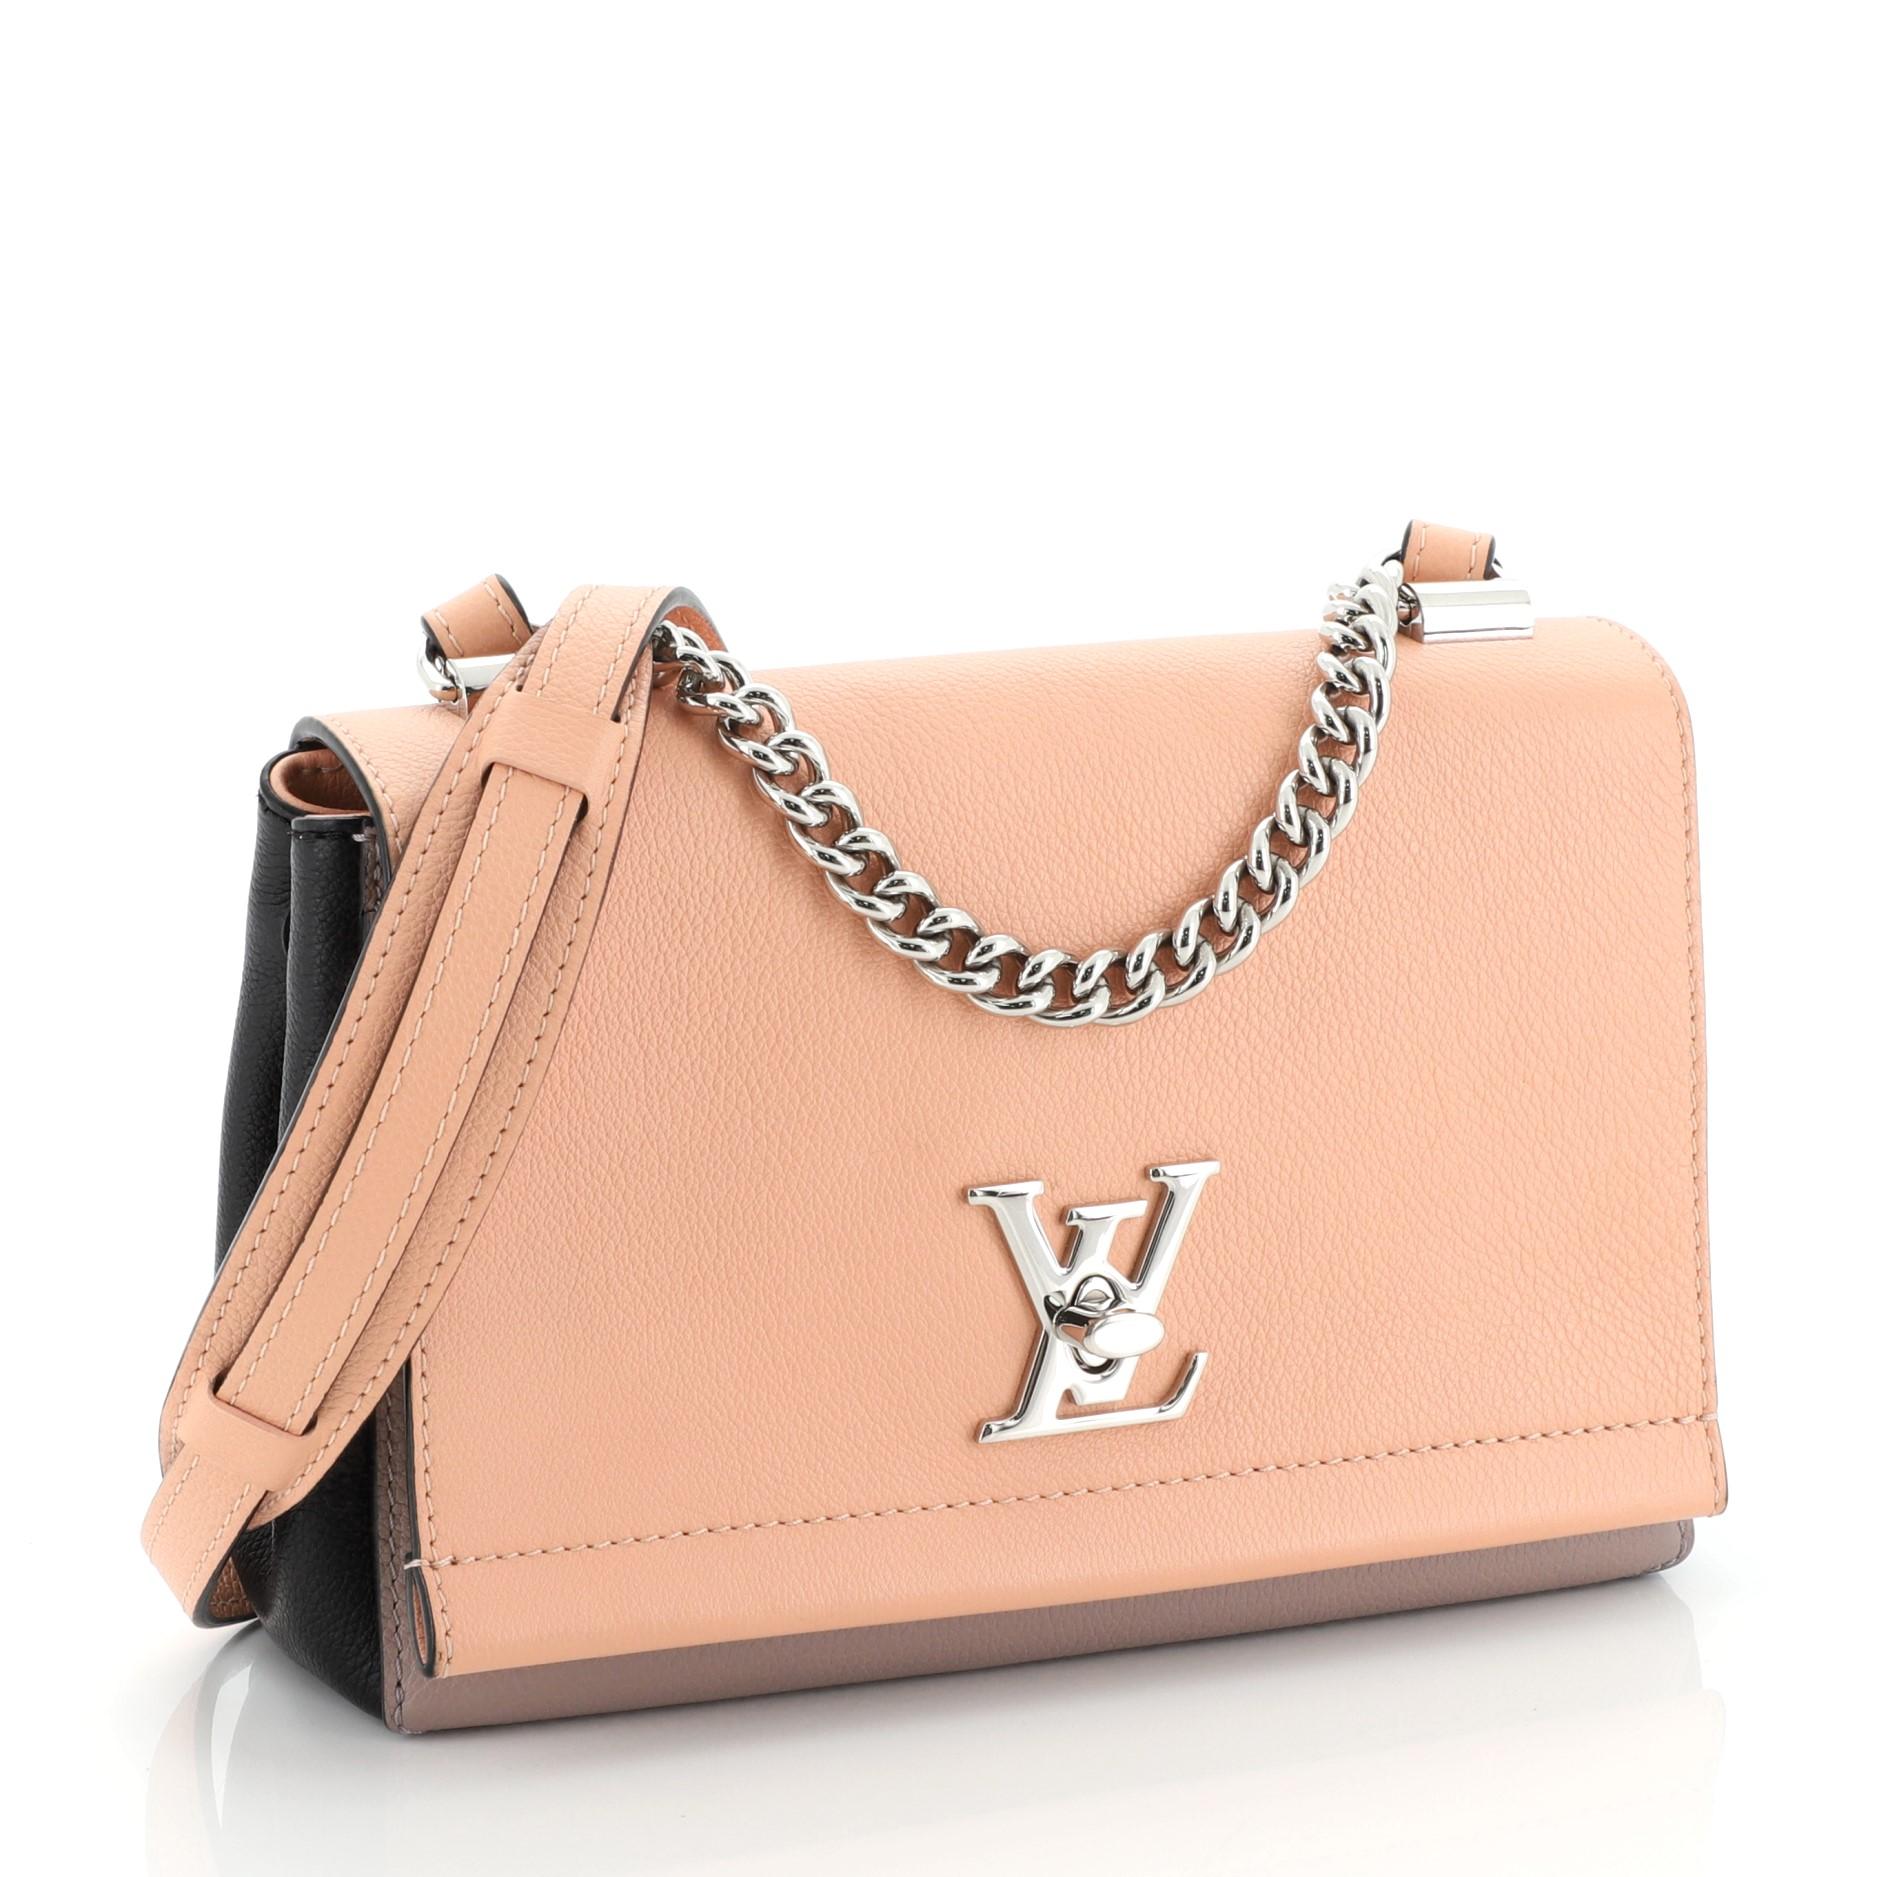 This Louis Vuitton Lockme II Handbag Leather BB, crafted in pink and multicolor leather, features chain link strap with leather pad, exterior back zip pocket, slip pocket under flap, and silver-tone hardware. Its LV twist-lock closure opens to a